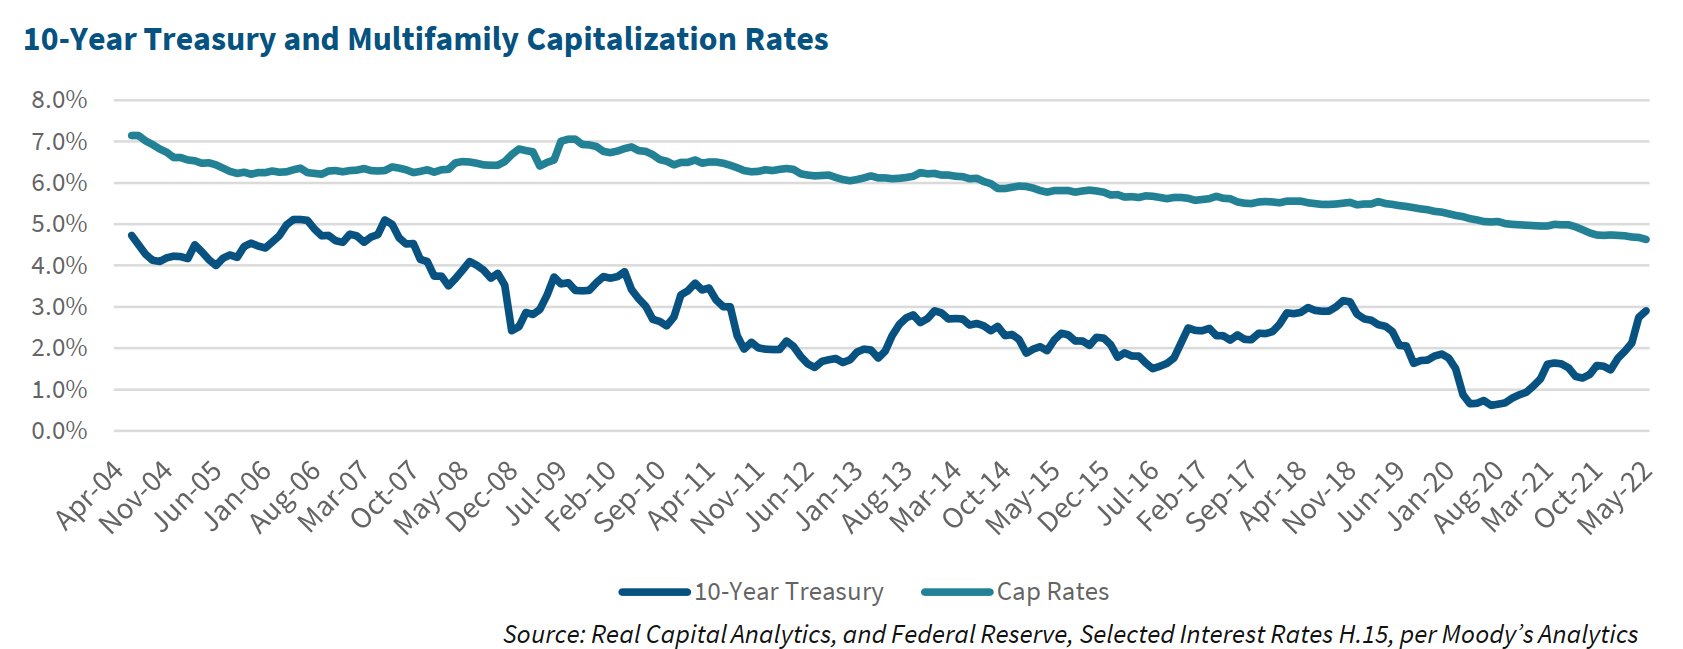 10-Year Treasury and Multifamily Capitalization Rate